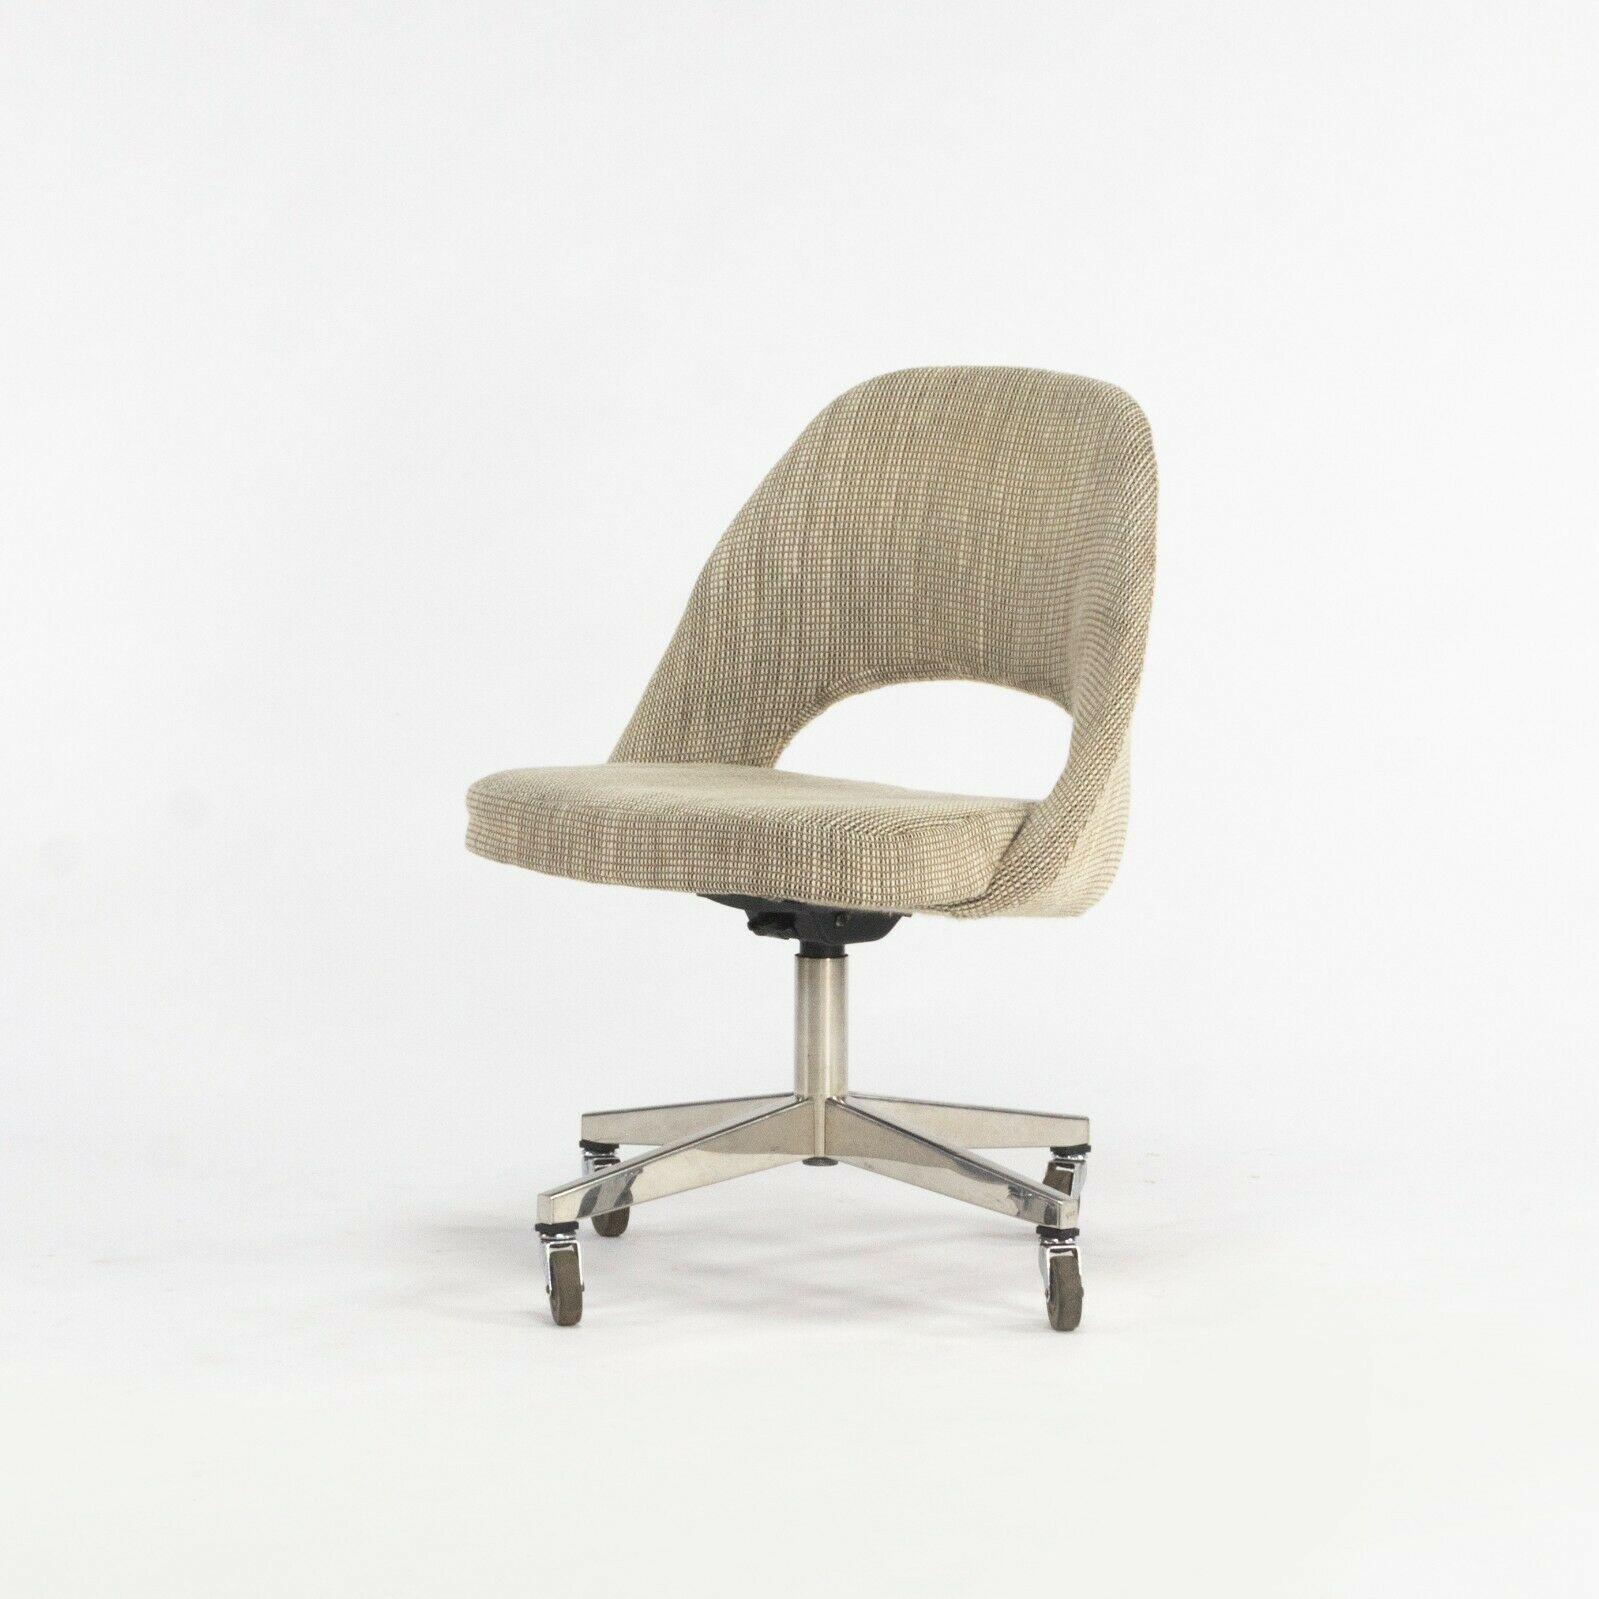 1974 Eero Saarinen for Knoll Rolling Executive Office Chairs Original Tan Fabric For Sale 3